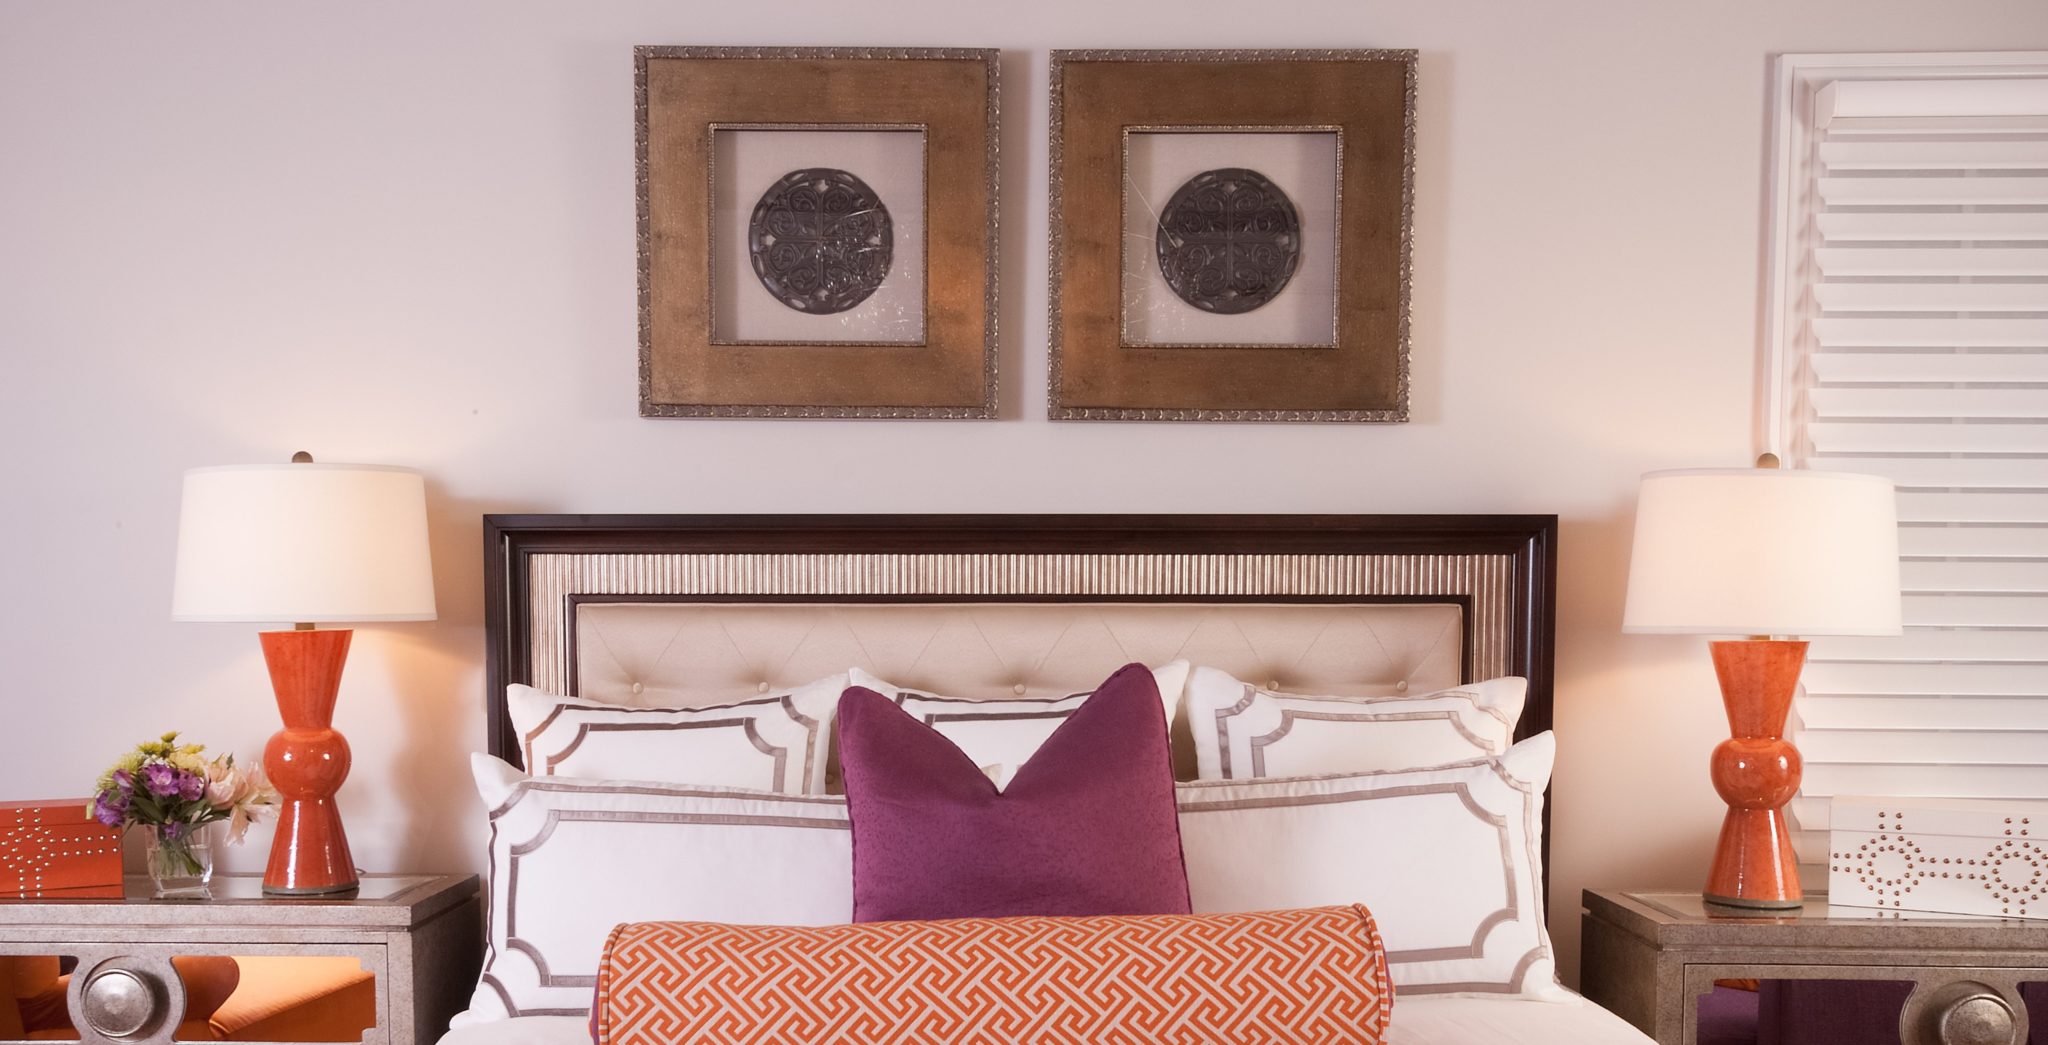 6 Fun Ways To Accent a Bedroom Wall